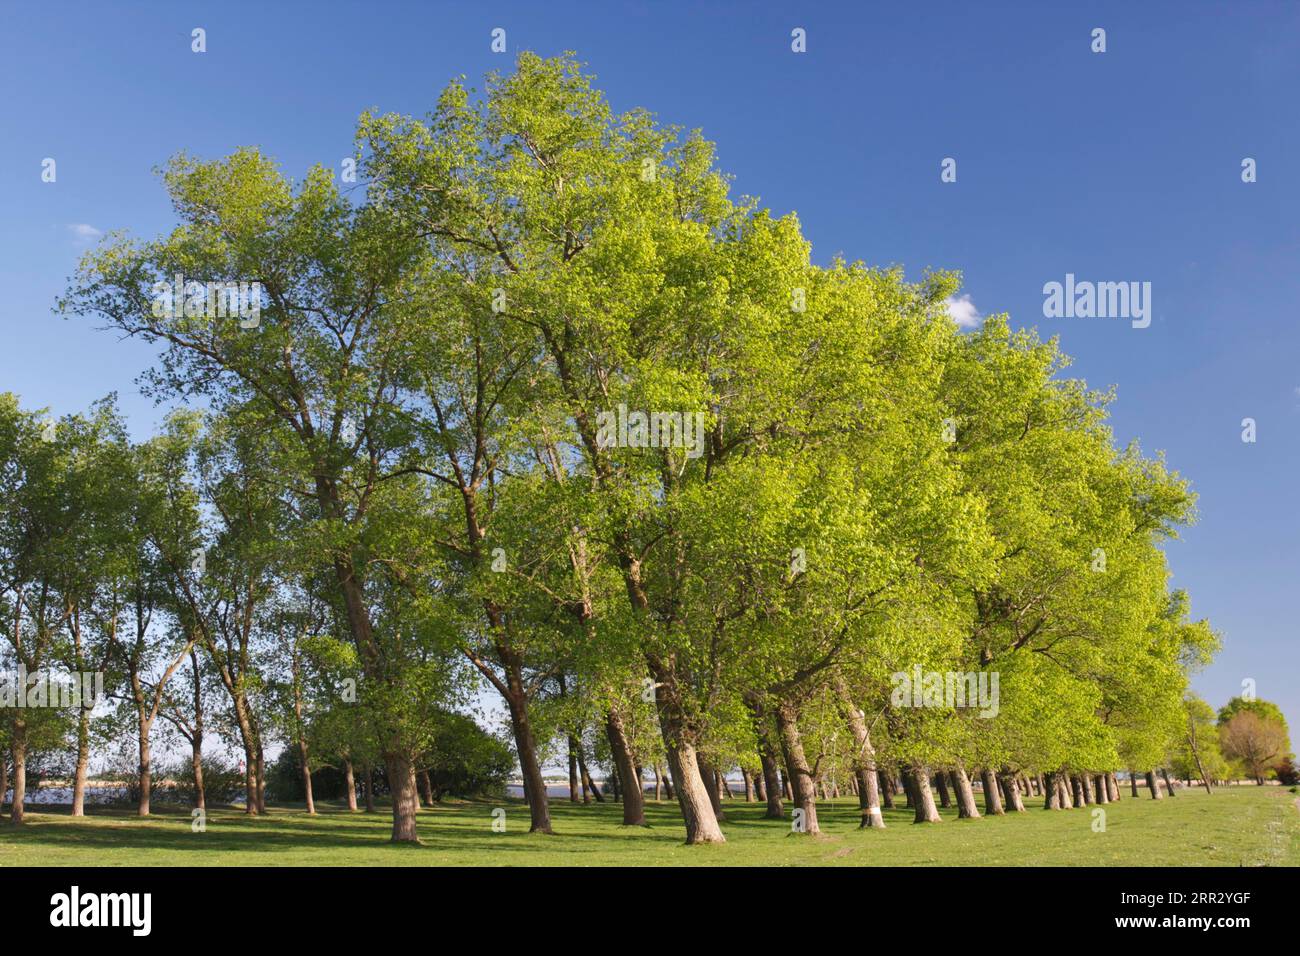 Gallery forest in spring on the Lower Weser island of Strohauser Plate, Strohauser Plate, Wesermarsch district, Lower Saxony, Germany Stock Photo